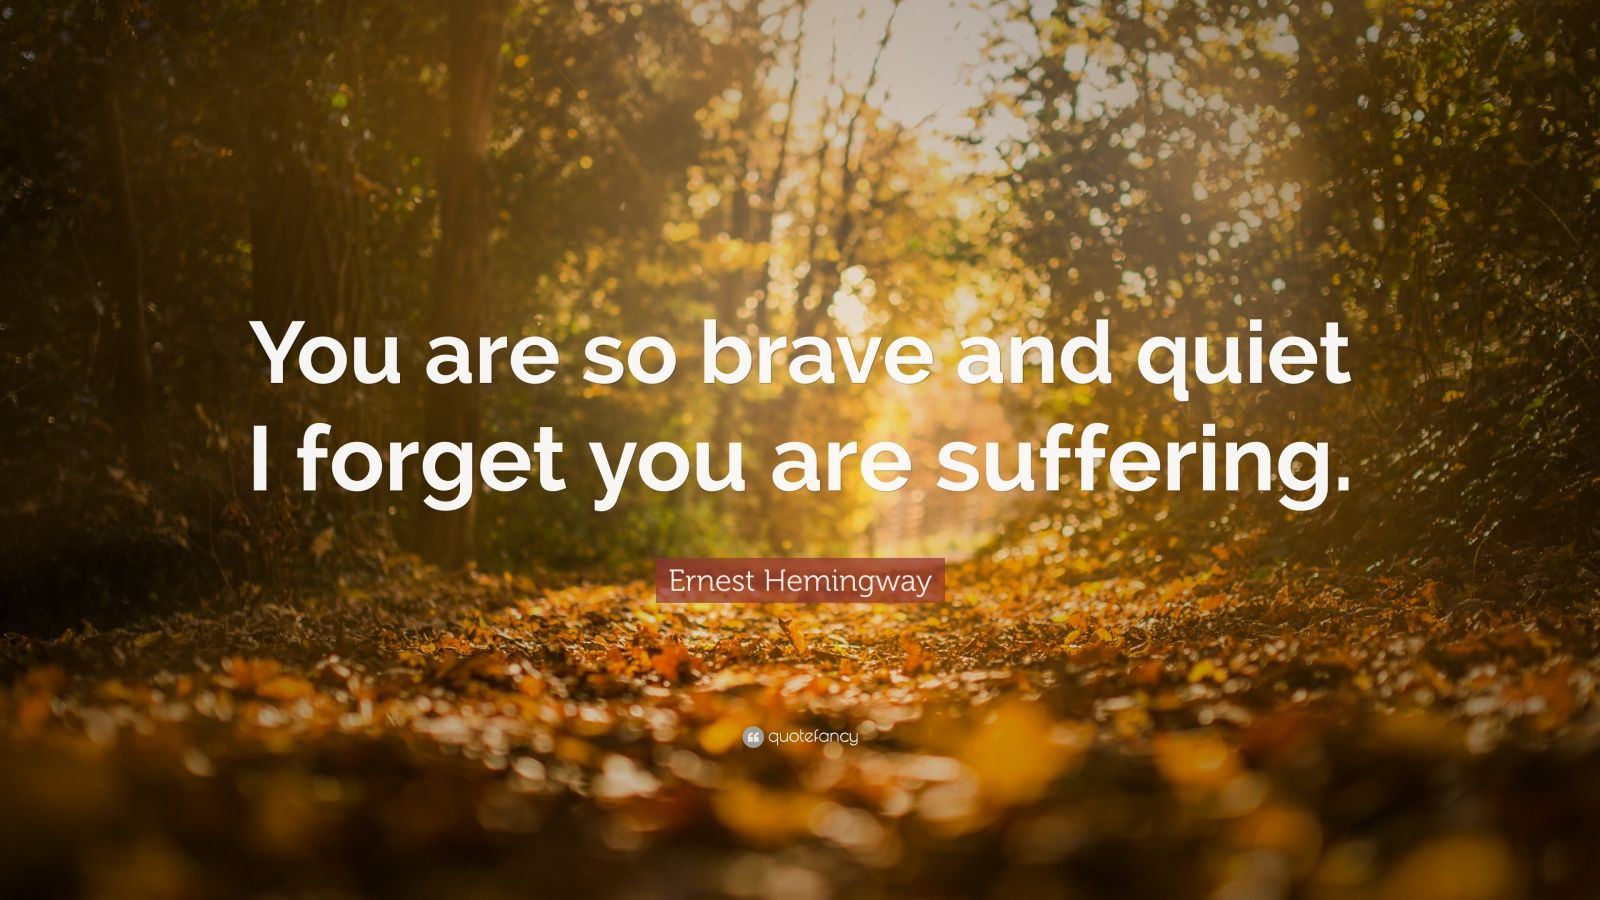 Ernest Hemingway Quote: “You are so brave and quiet I forget you are